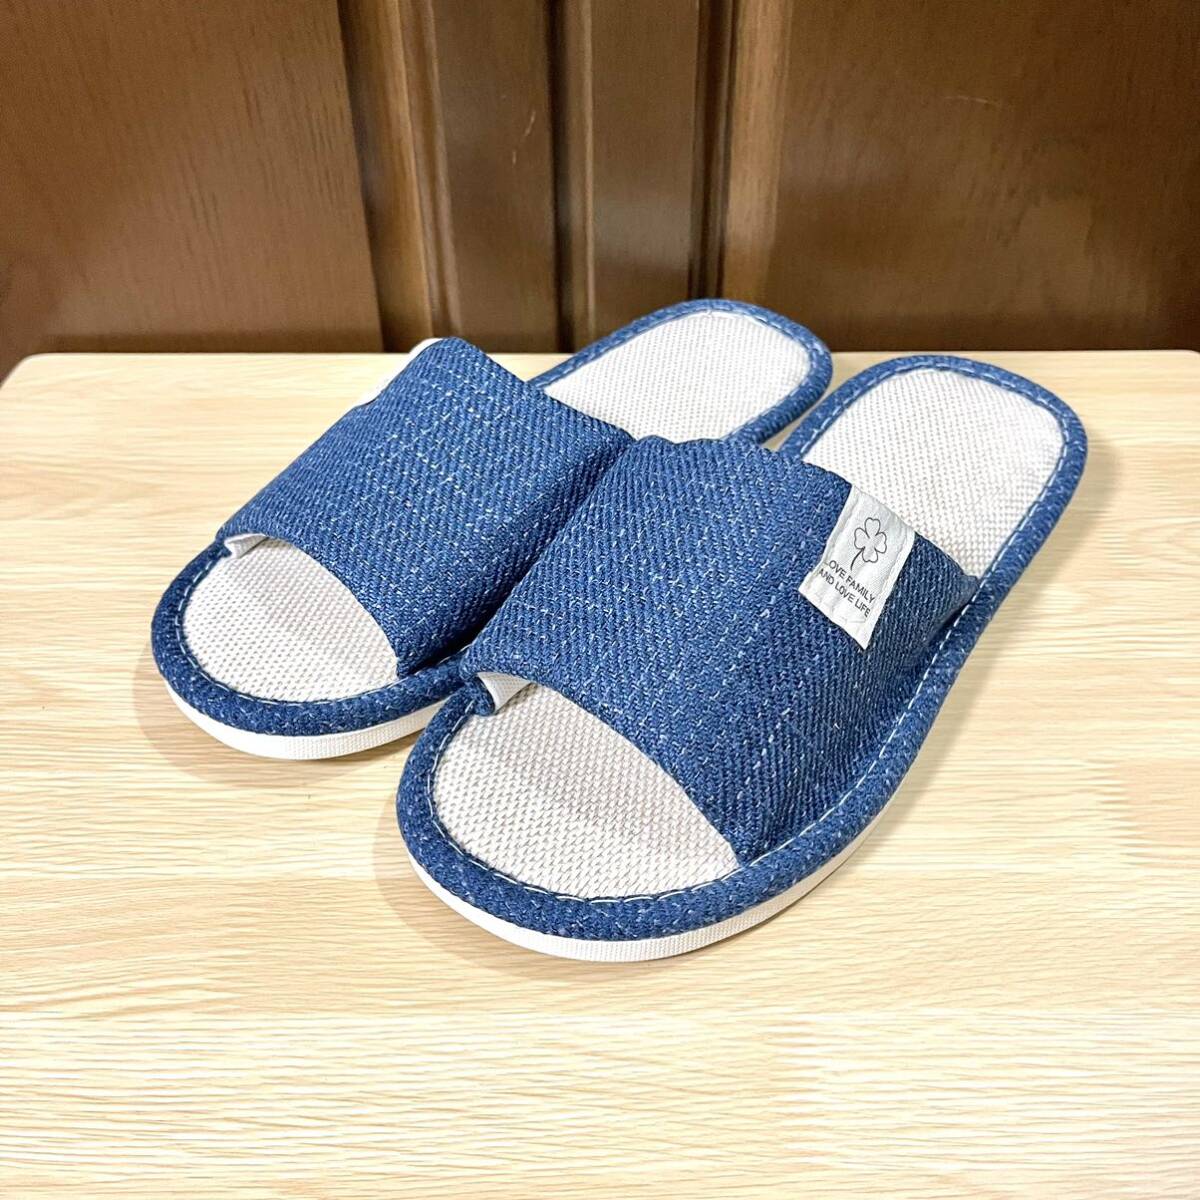  slippers room shoes linen flax all season ventilation cotton flax cloth feeling .. navy 25.5~26.0